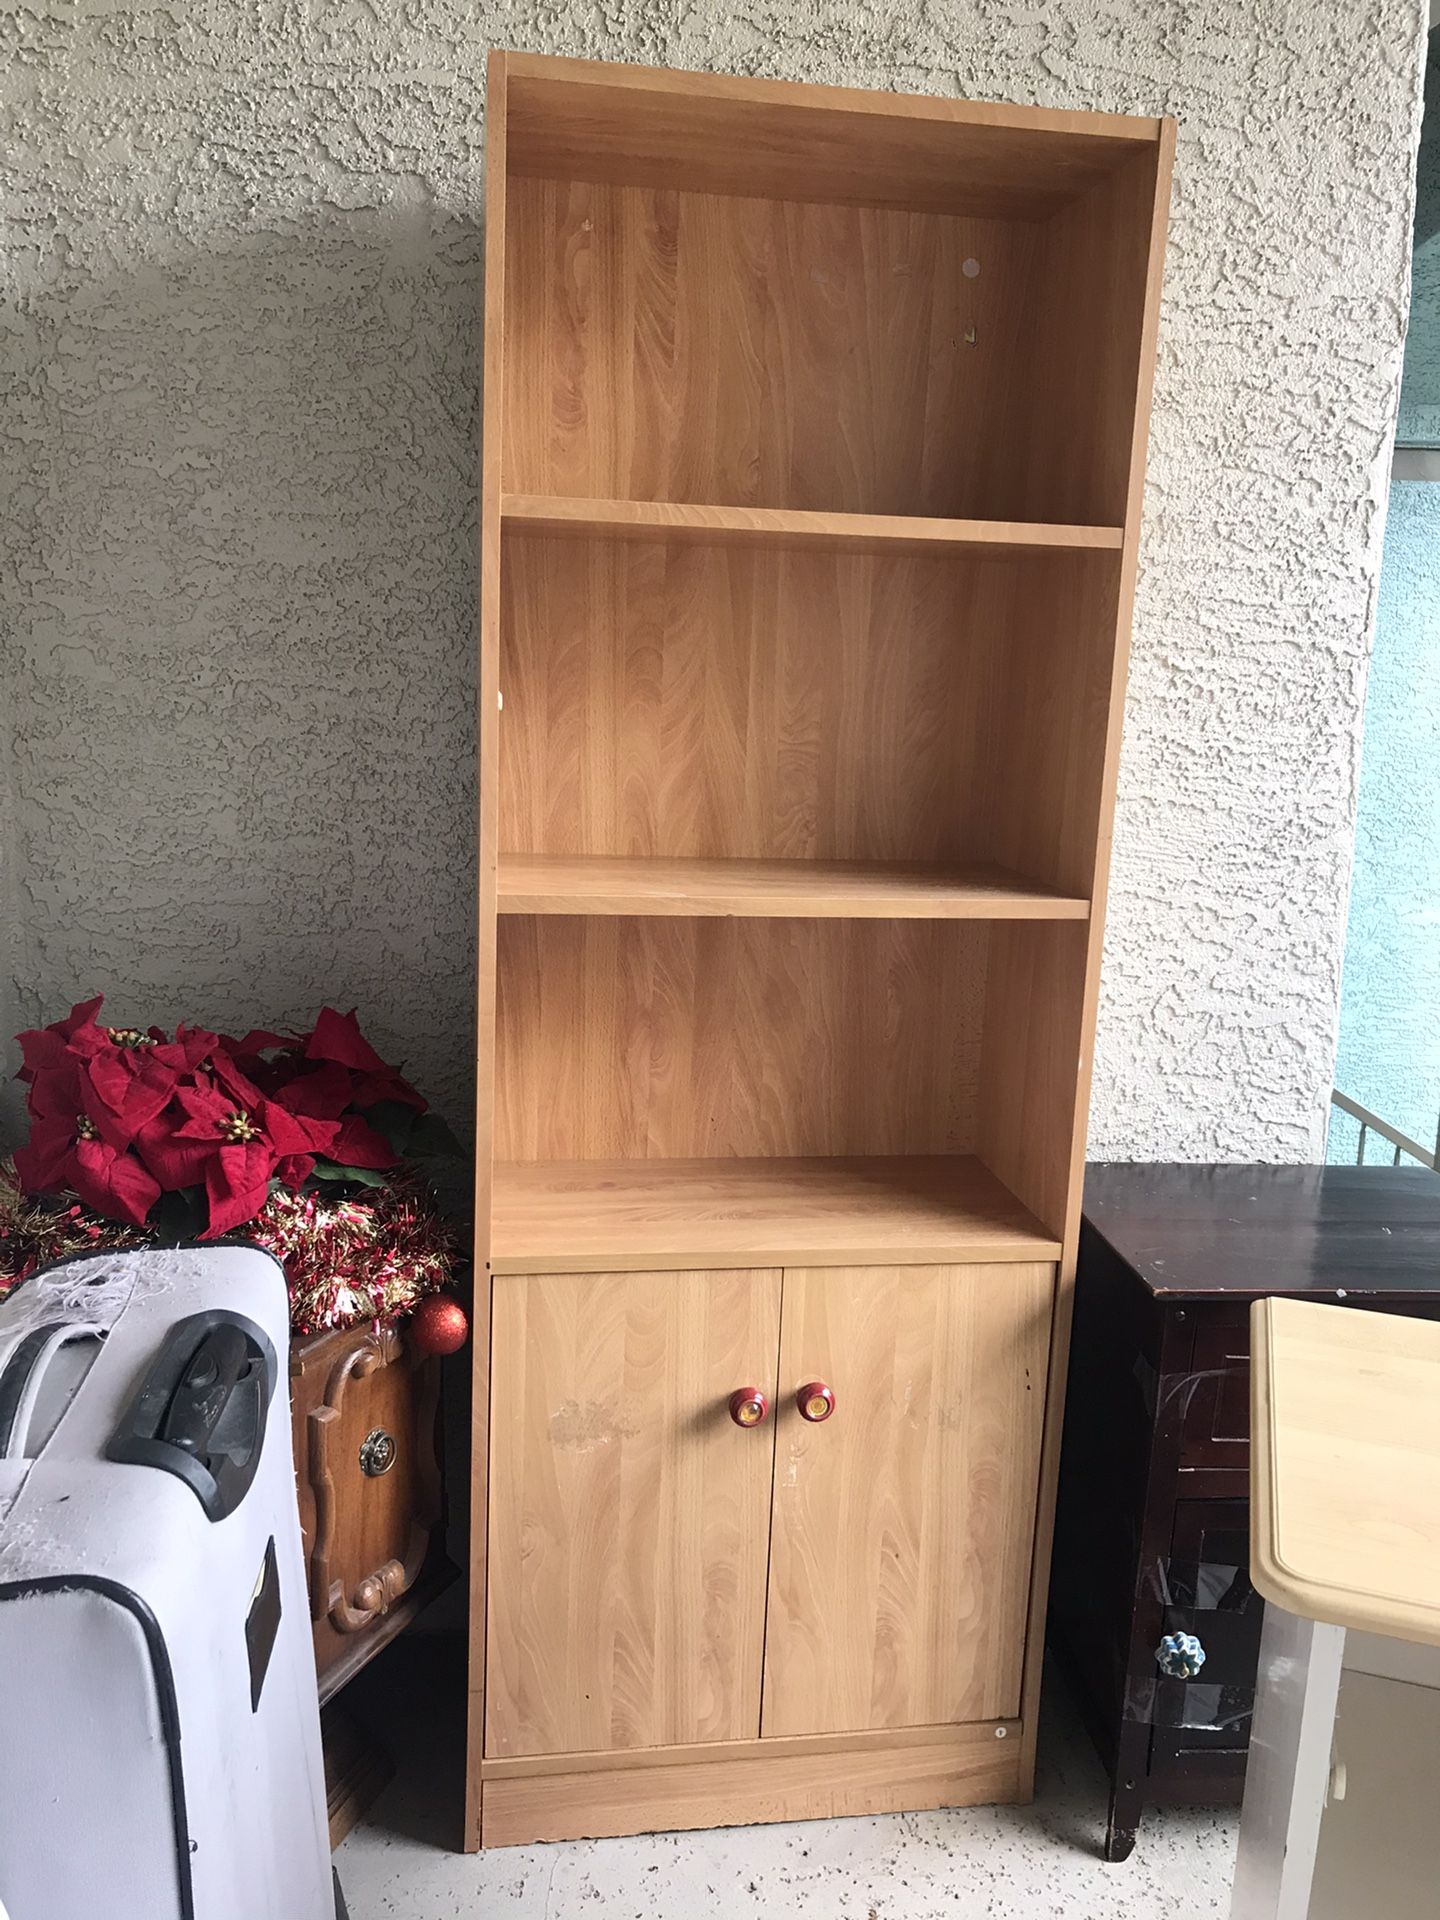 5 1/2 foot tall book shelf with small double door storage